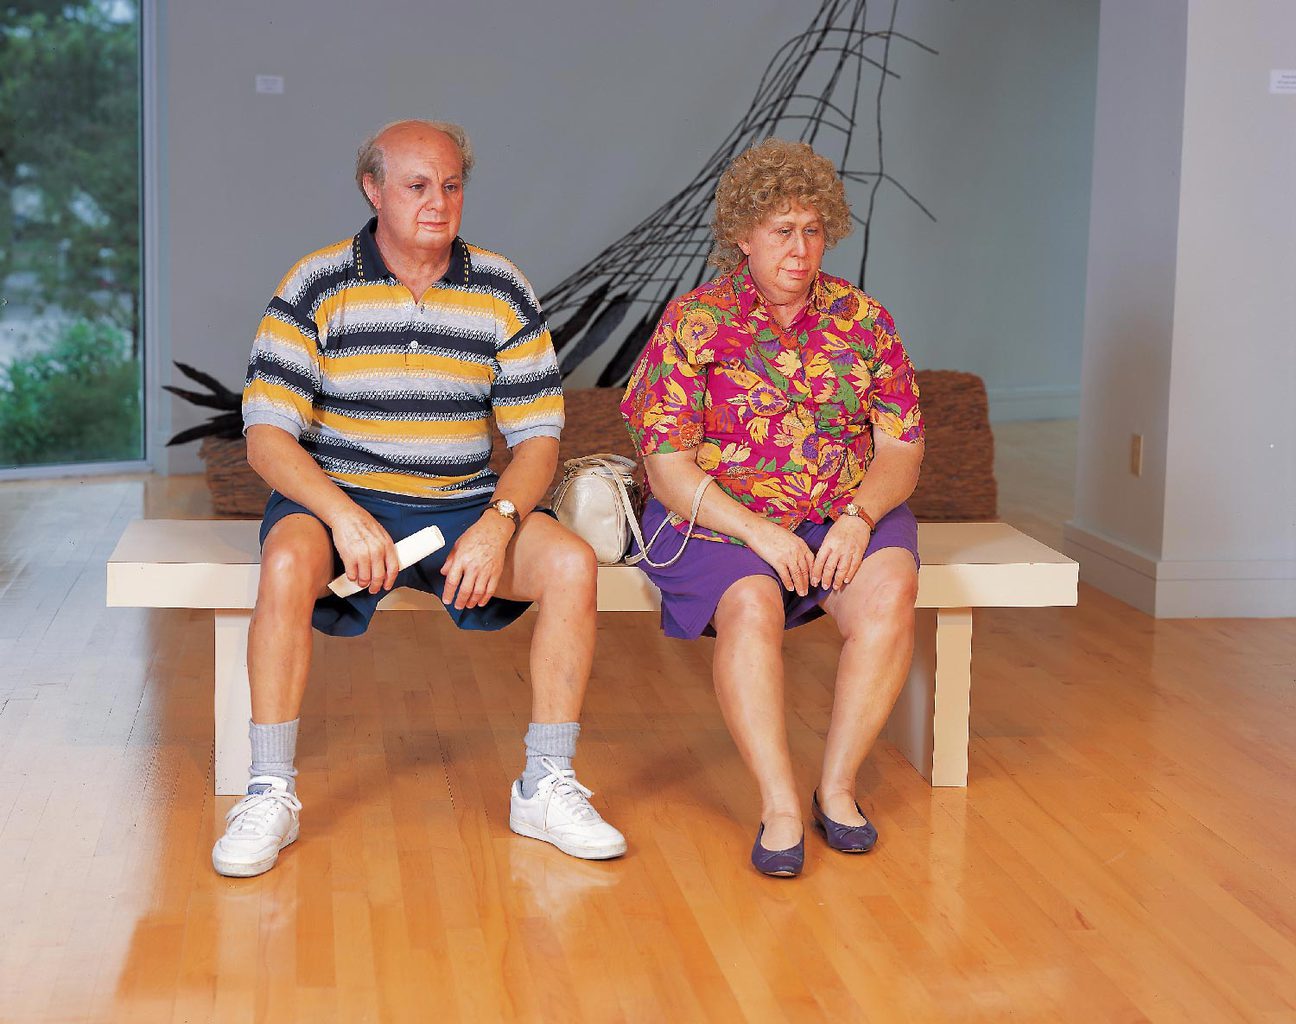 Duane Hanson, Old Couple on a Bench, 1994 